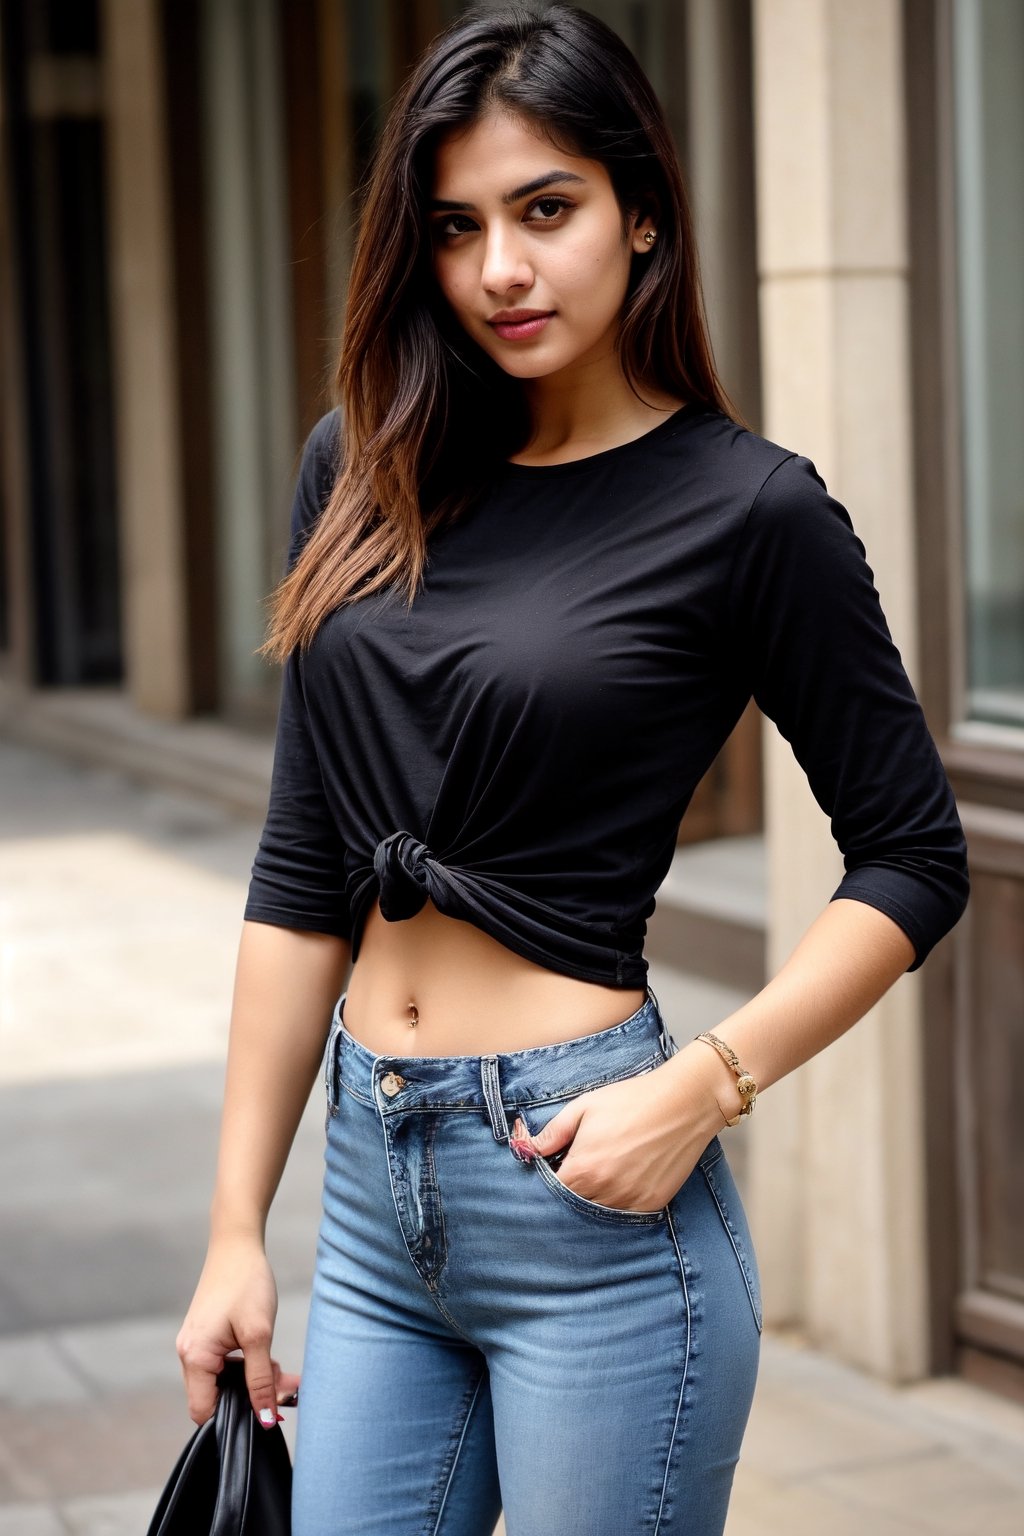 There a girl isma young hot beautiful hsdan girl Wearing Black Shirt and Jeans, hot looks face features like Kama Kaif, summer look Standing locking into the camer,